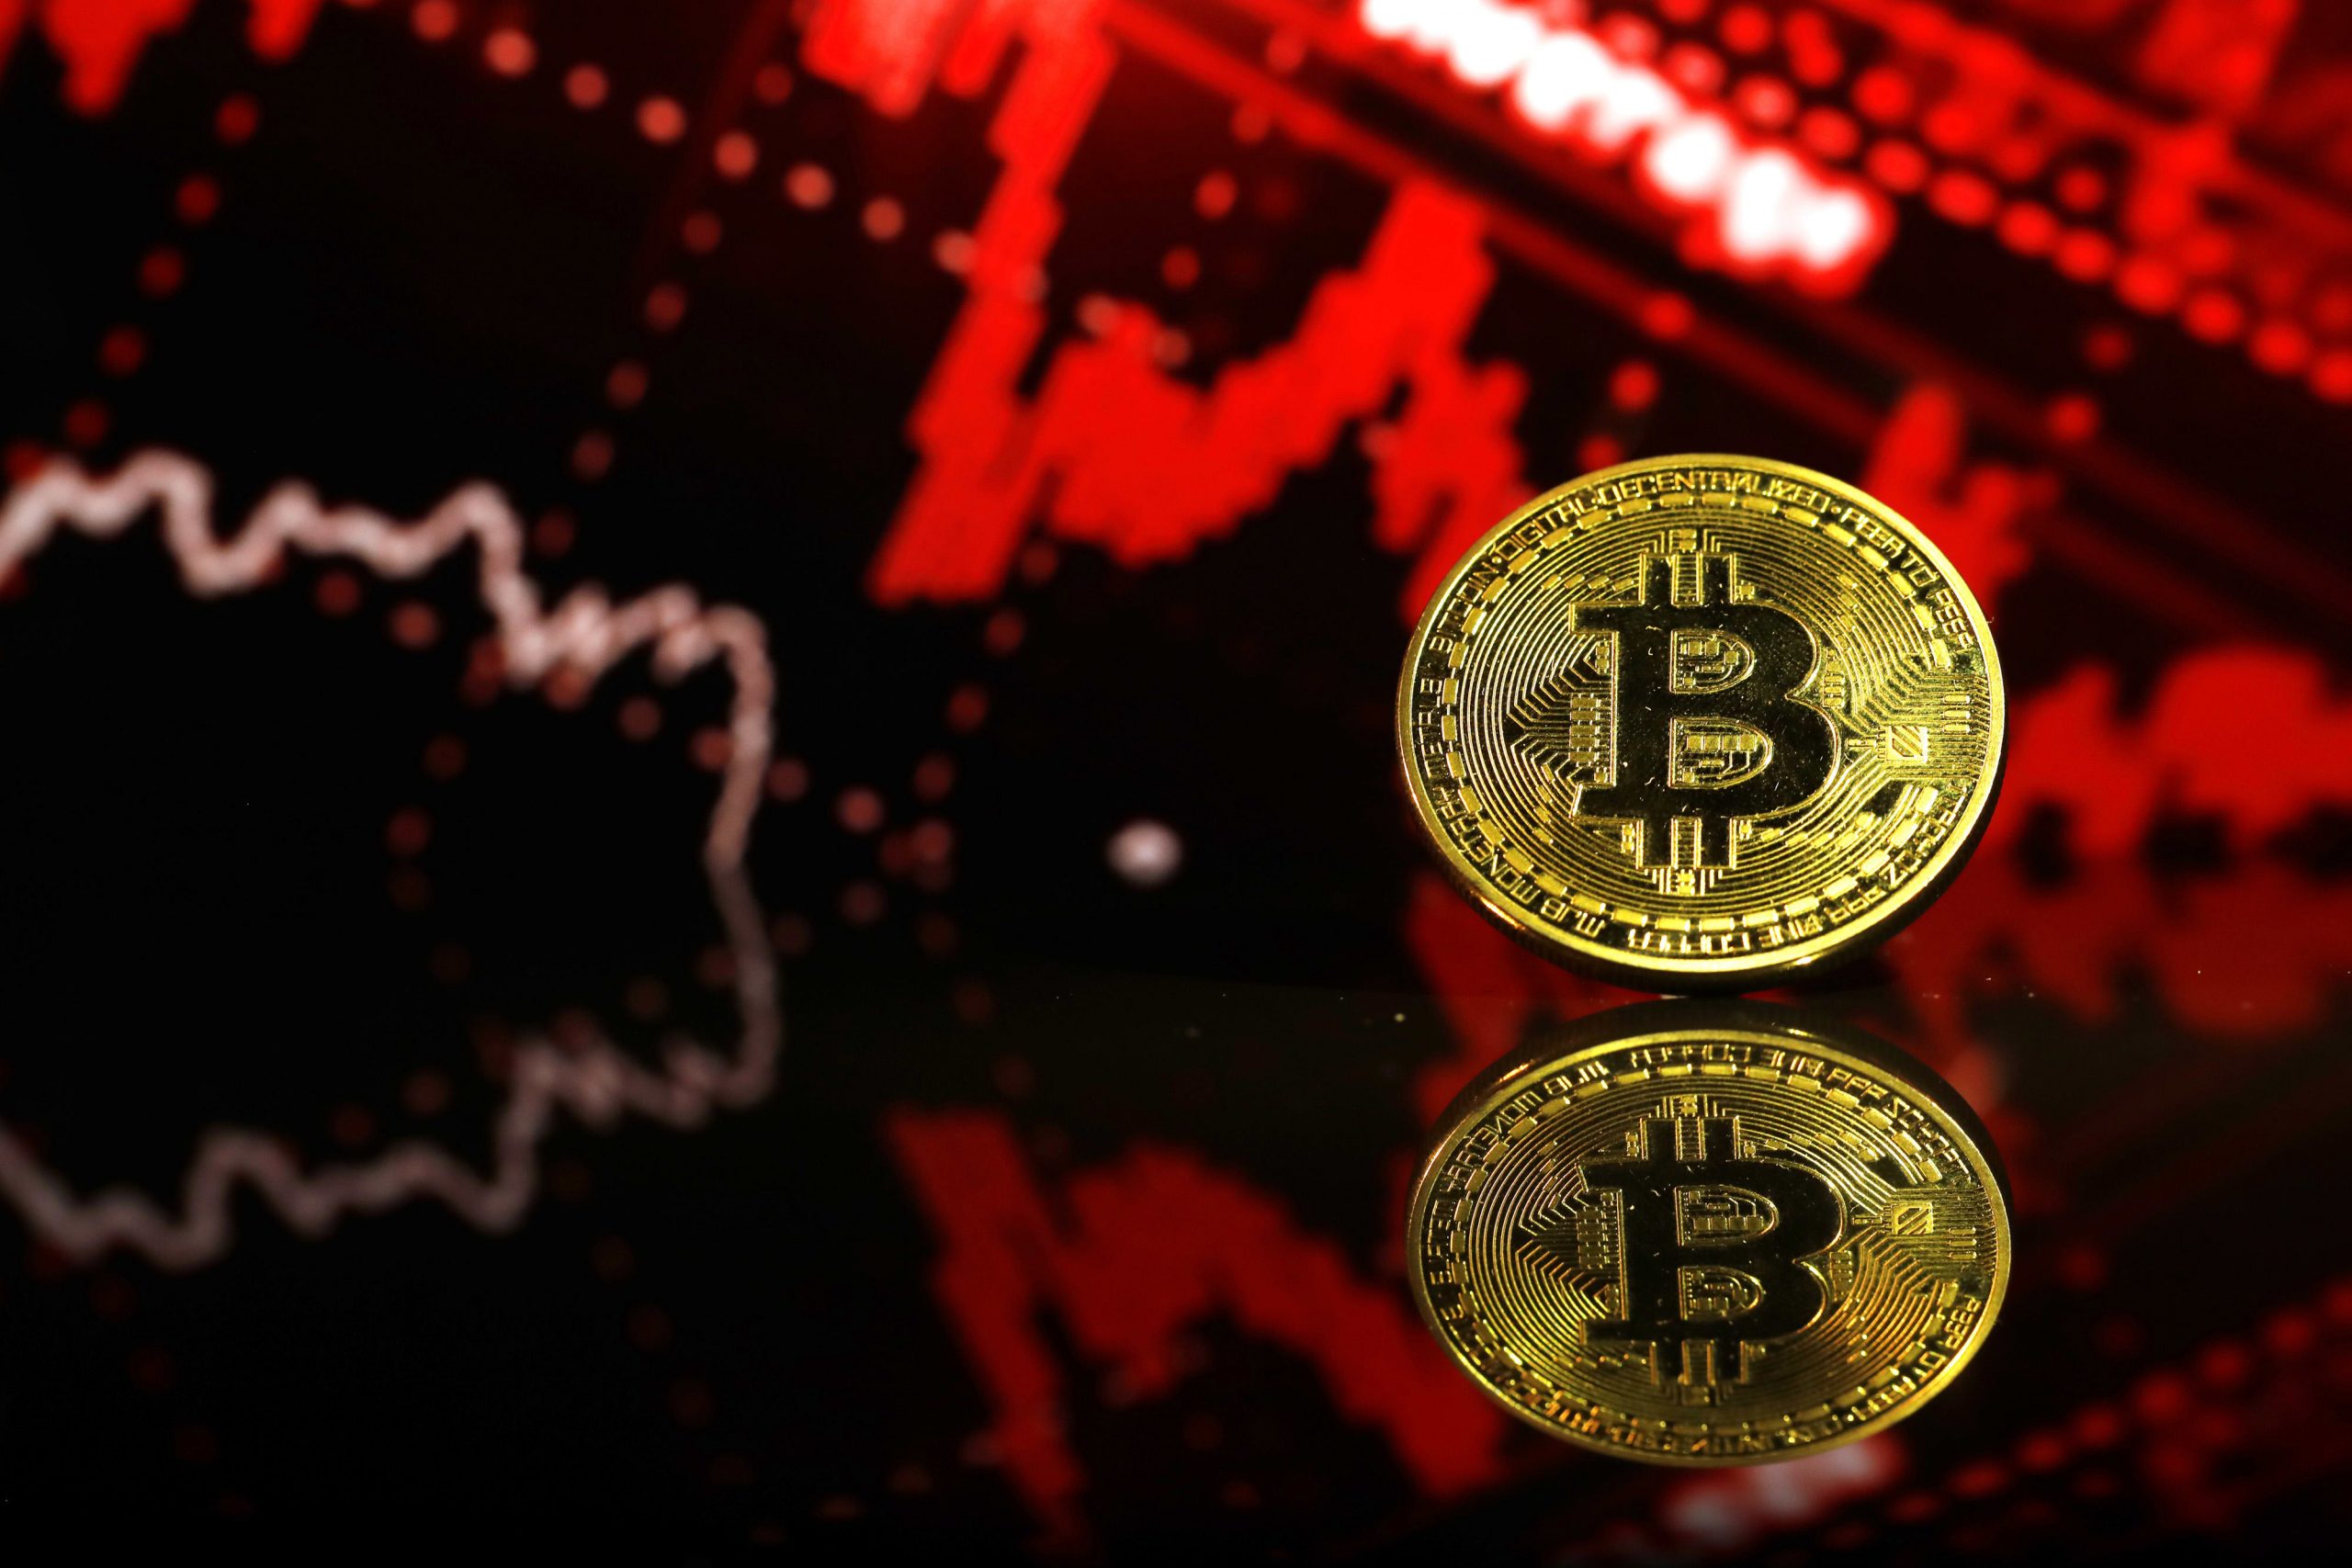 Bitcoin's plunge intensifies, tanks 30% to $30,000 in single